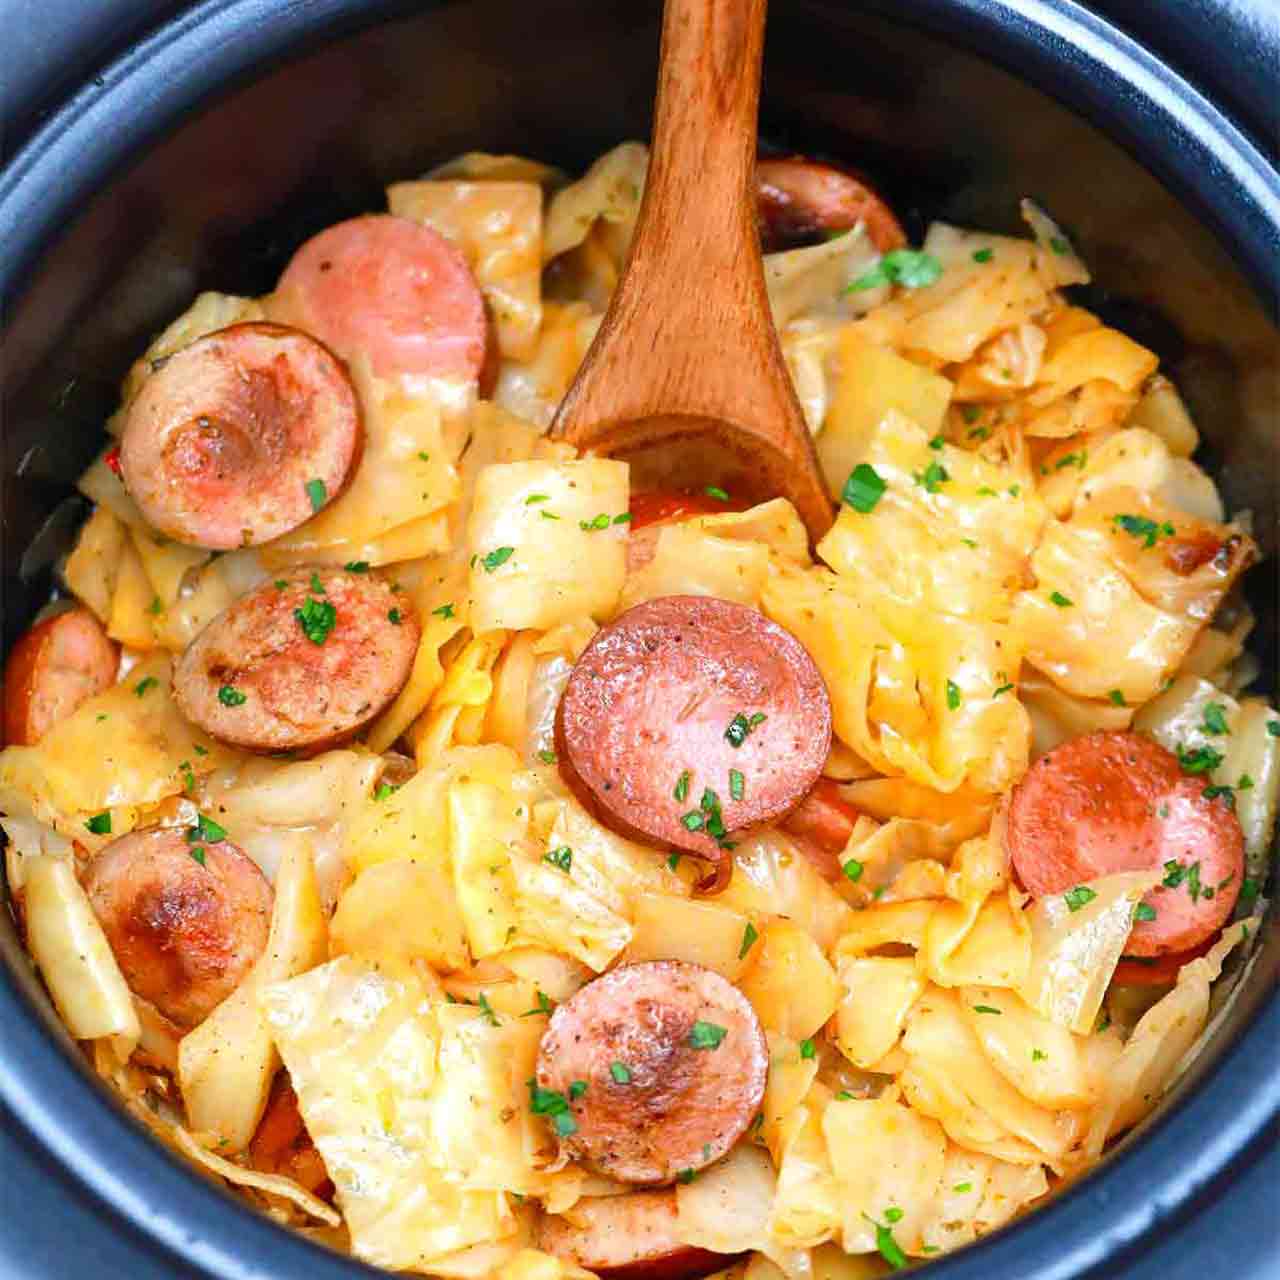 Slow Cooker Cabbage and Sausage [Video] - S&SM